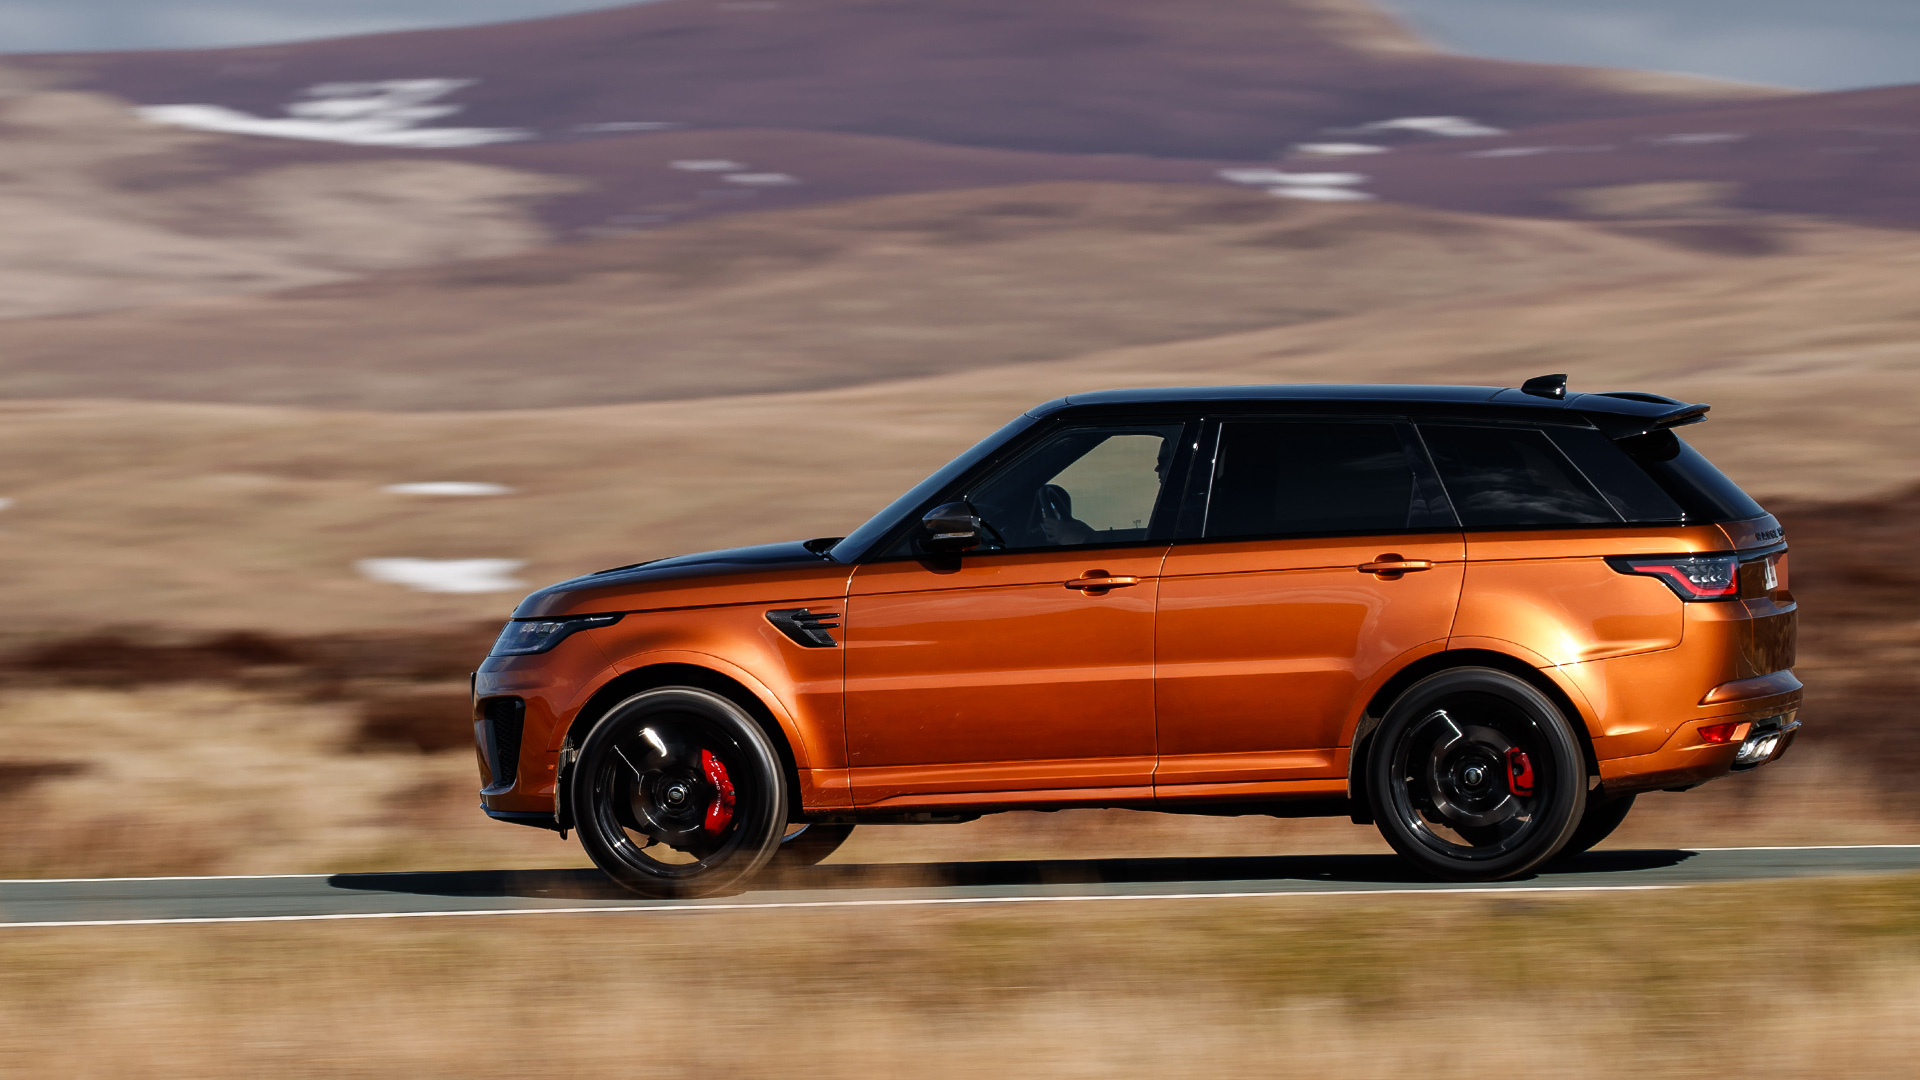 Land Rover Range Rover Sport 2019 2.0 l Petrol S - Price in India, Mileage,  Reviews, Colours, Specification, Images - Overdrive